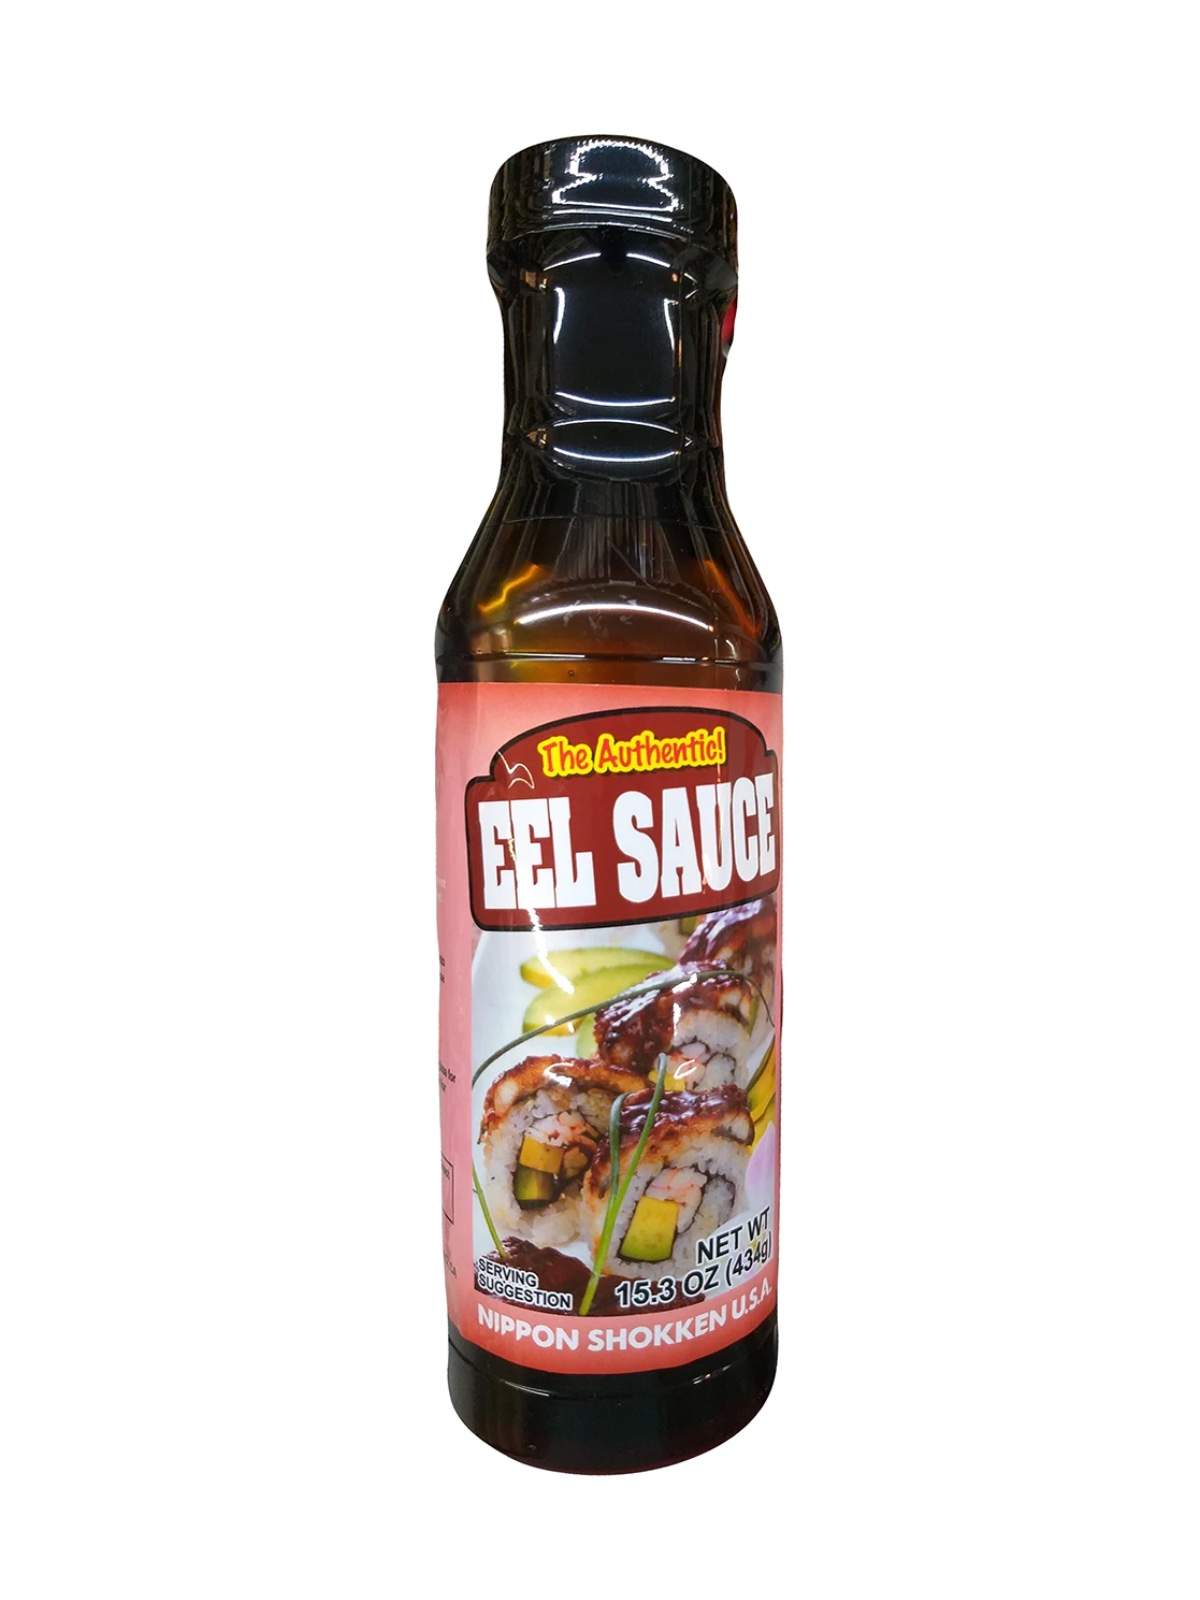 Dark glass bottle of Nippon Shokken Eel Sauce with red and pink label against a white background.